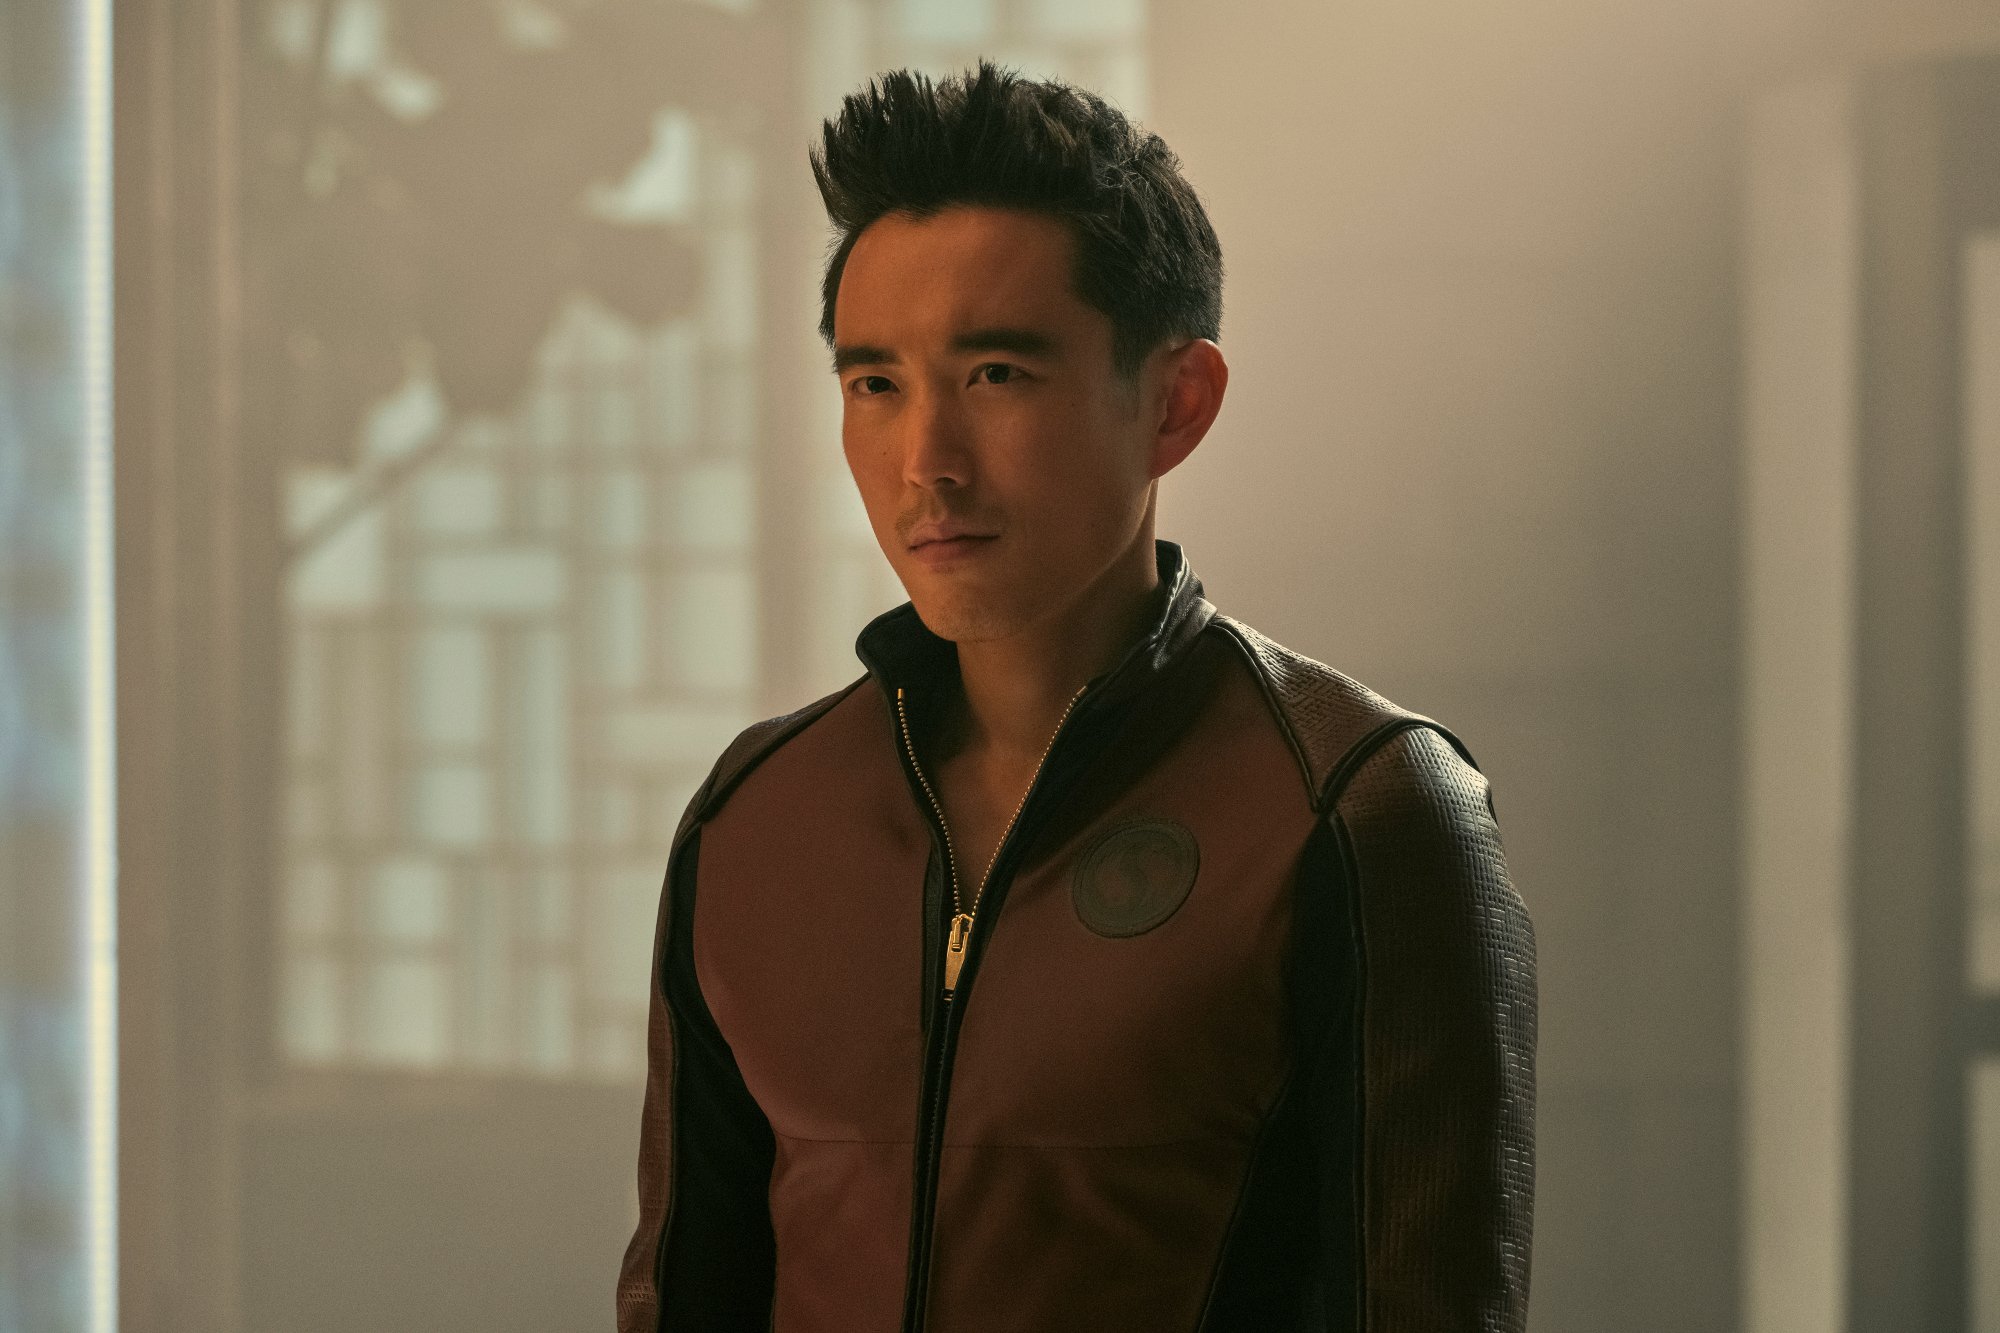 Justin H. Min as Ben Hargreeves in 'The Umbrella Academy' Season 3 on Netflix. He's wearing a red and black jacket, and his hair is spiked up.